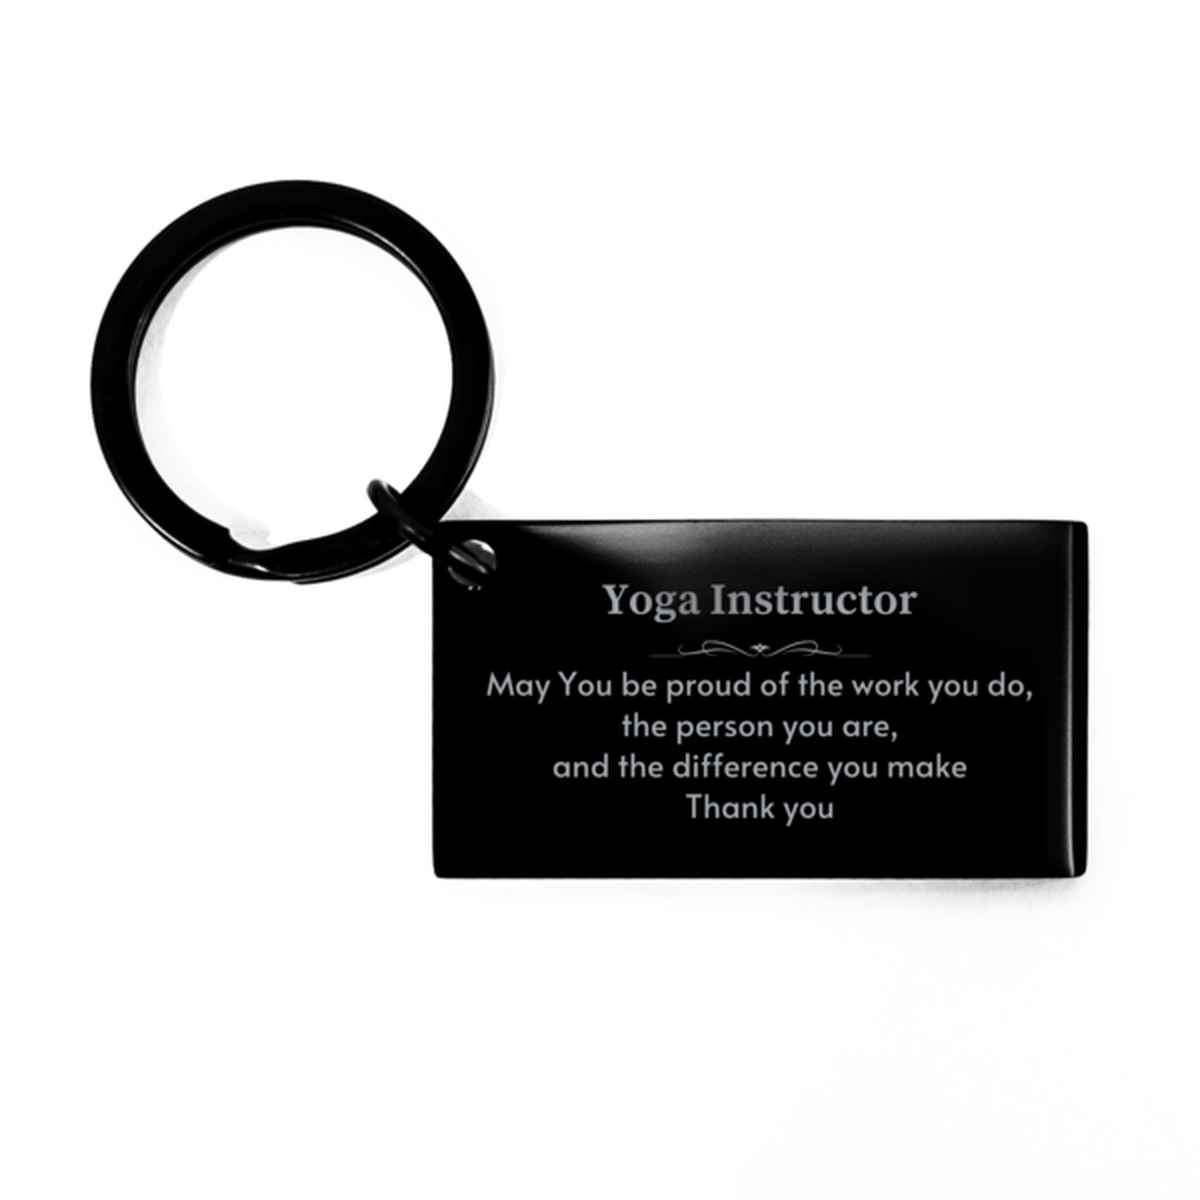 Heartwarming Keychain Retirement Coworkers Gifts for Yoga Instructor, Author May You be proud of the work you do, the person you are Gifts for Boss Men Women Friends